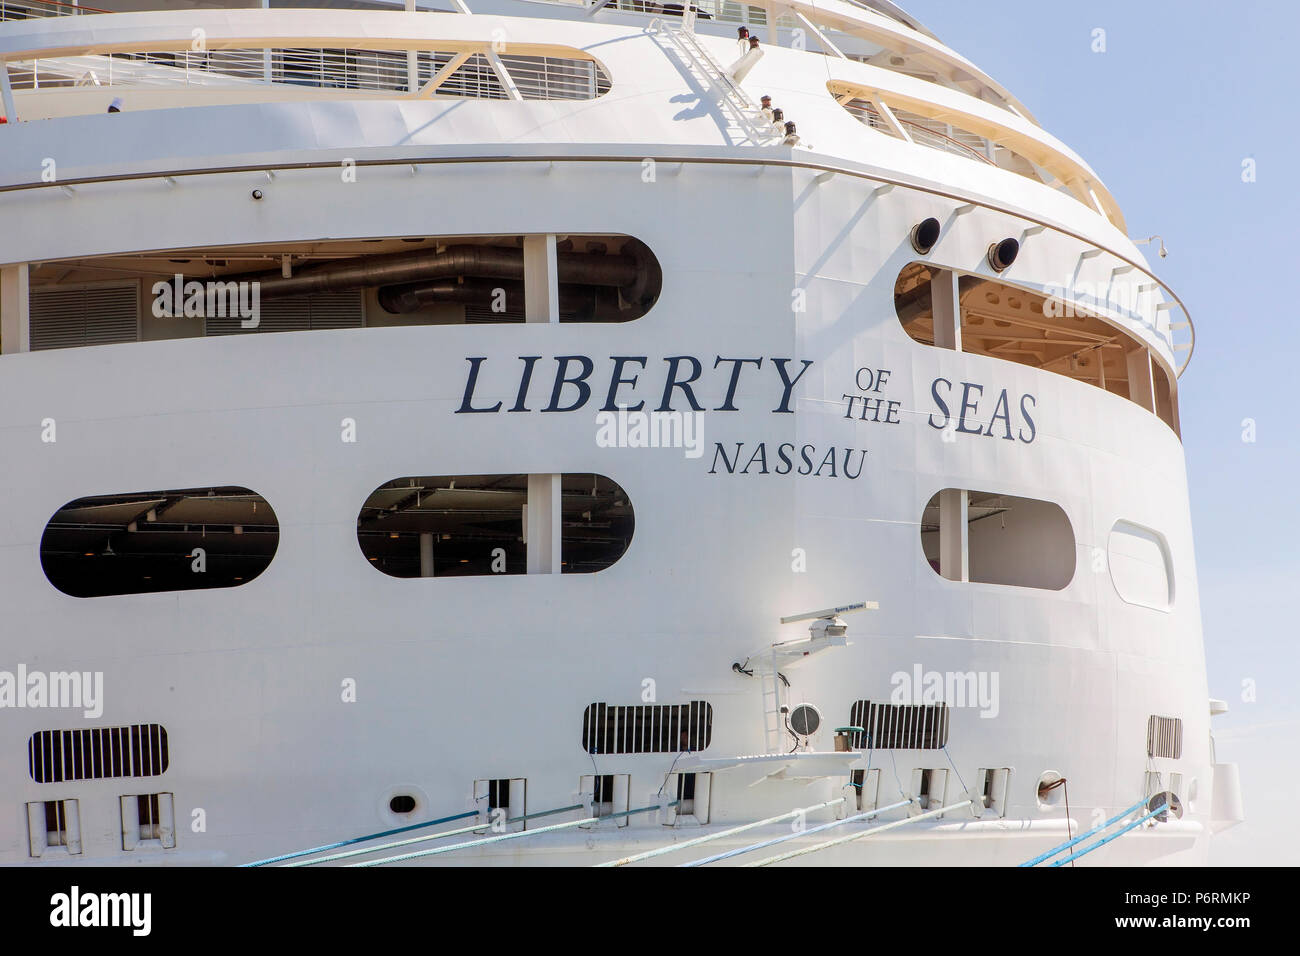 Stern of the luxury cruise liner Liberty of the Seas, a Freedom class cruise liner, has hull cut-outs to provide ventilation. Stock Photo